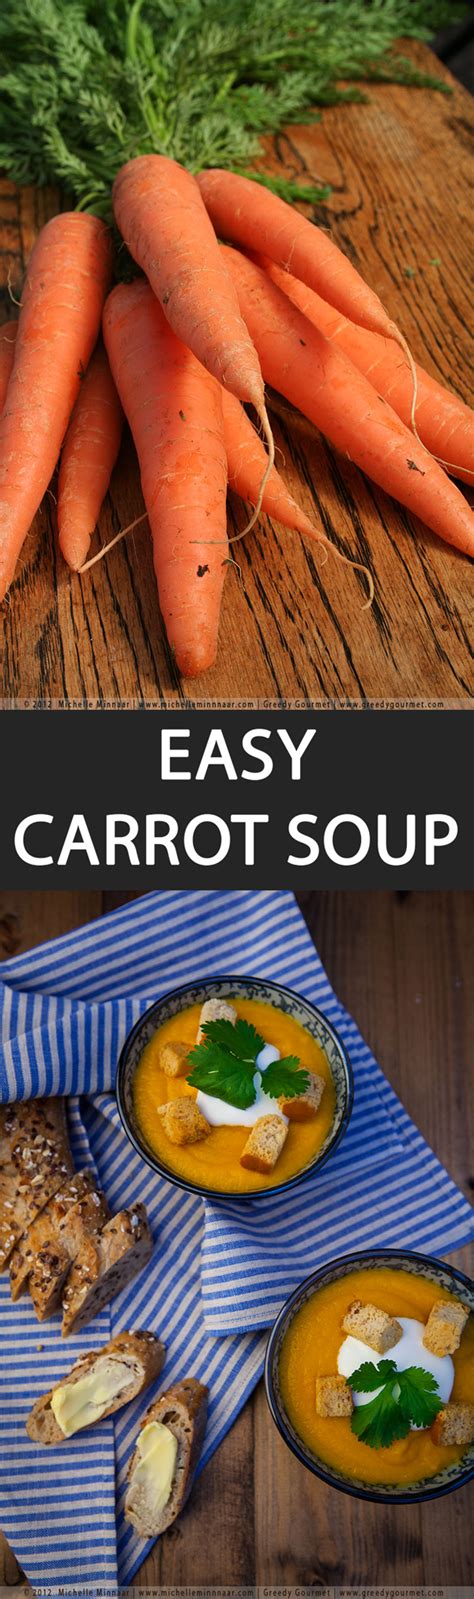 This meal provides 87 kcal, 2.2g protein, 11.7g carbohydrate (of which 10.2g sugars), 3.4g fat (of which 0.4g saturates), 4.2g. How To Make Carrot Soup - Master This Simple Carrot Soup ...